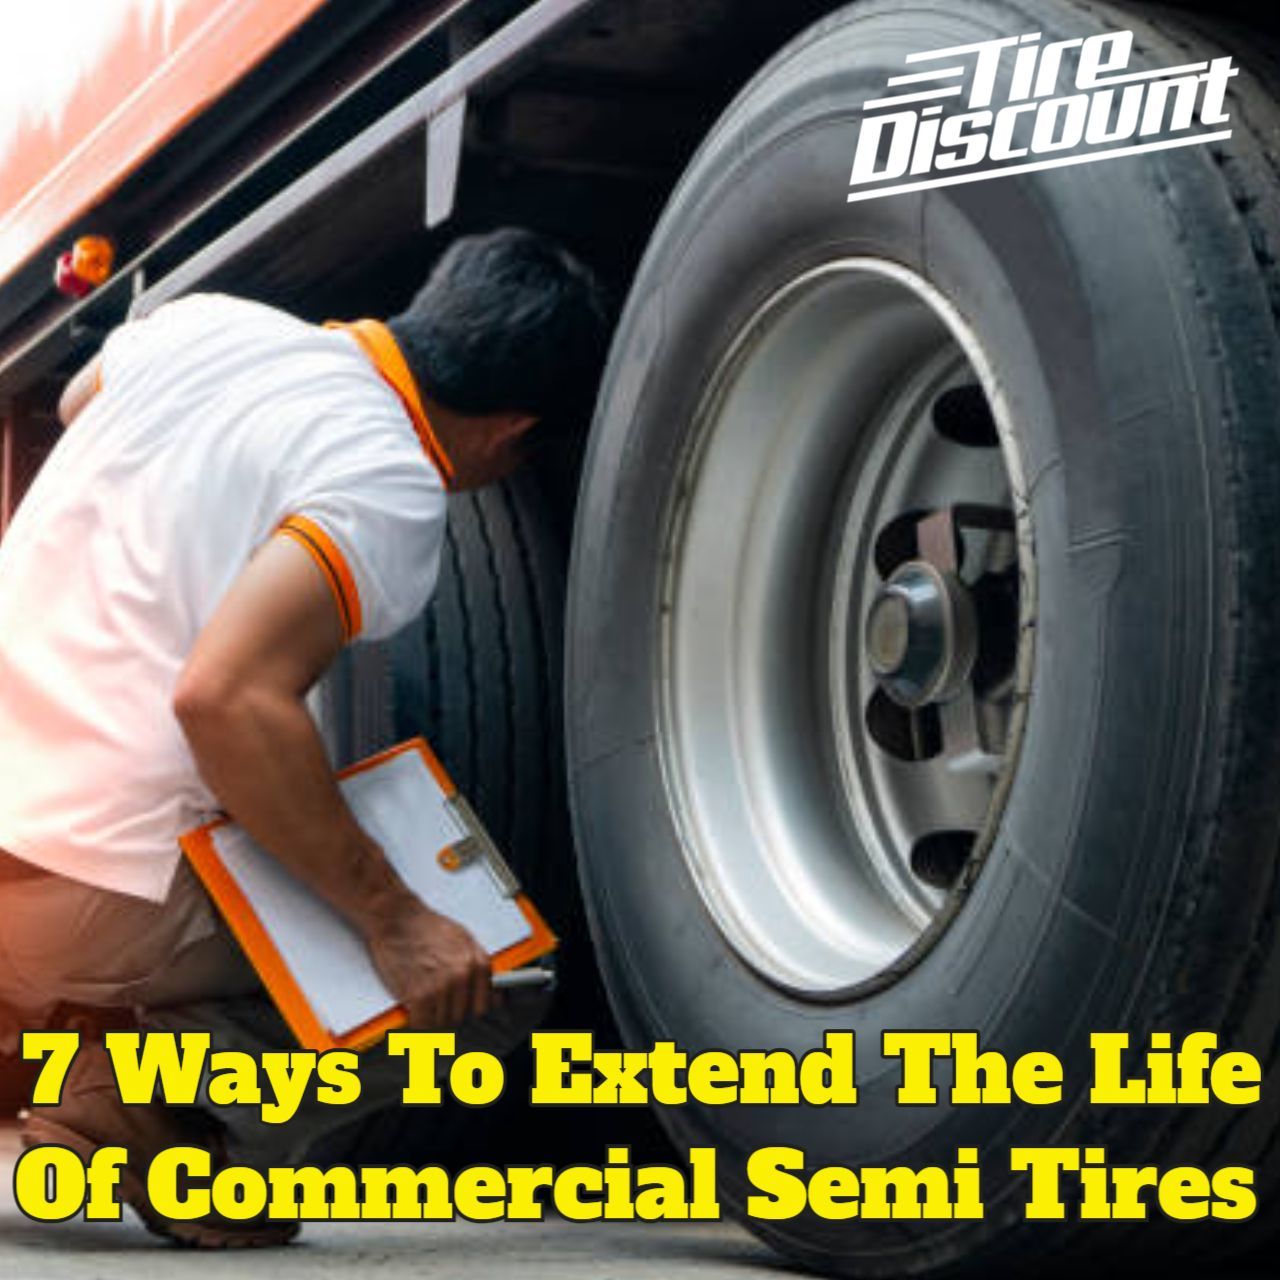 7 Ways To Extend The Life Of Commercial Semi Tires